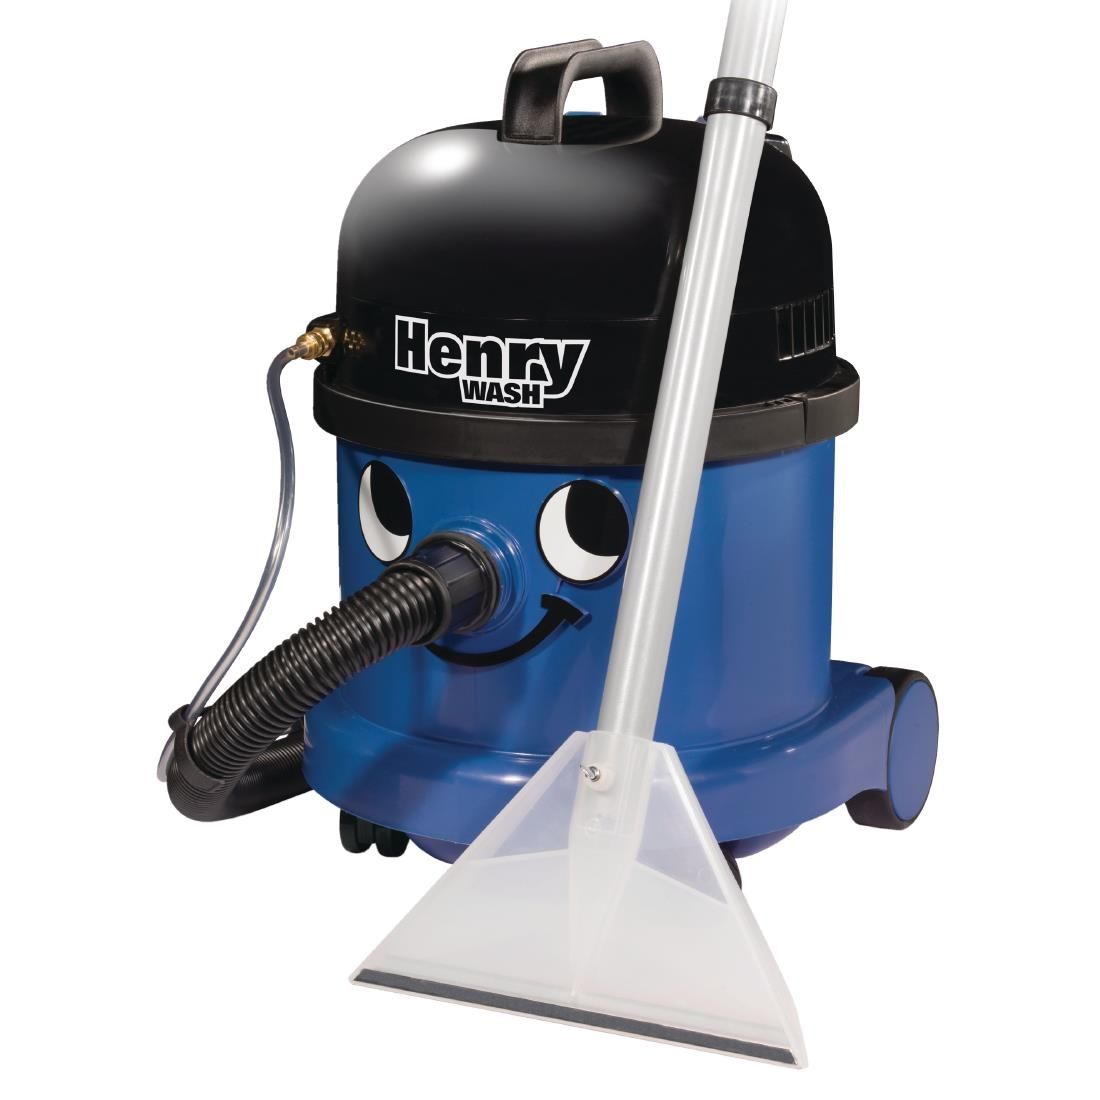 Henry Wash Carpet and Upholstery Cleaner HVW 370-2 JD Catering Equipment Solutions Ltd